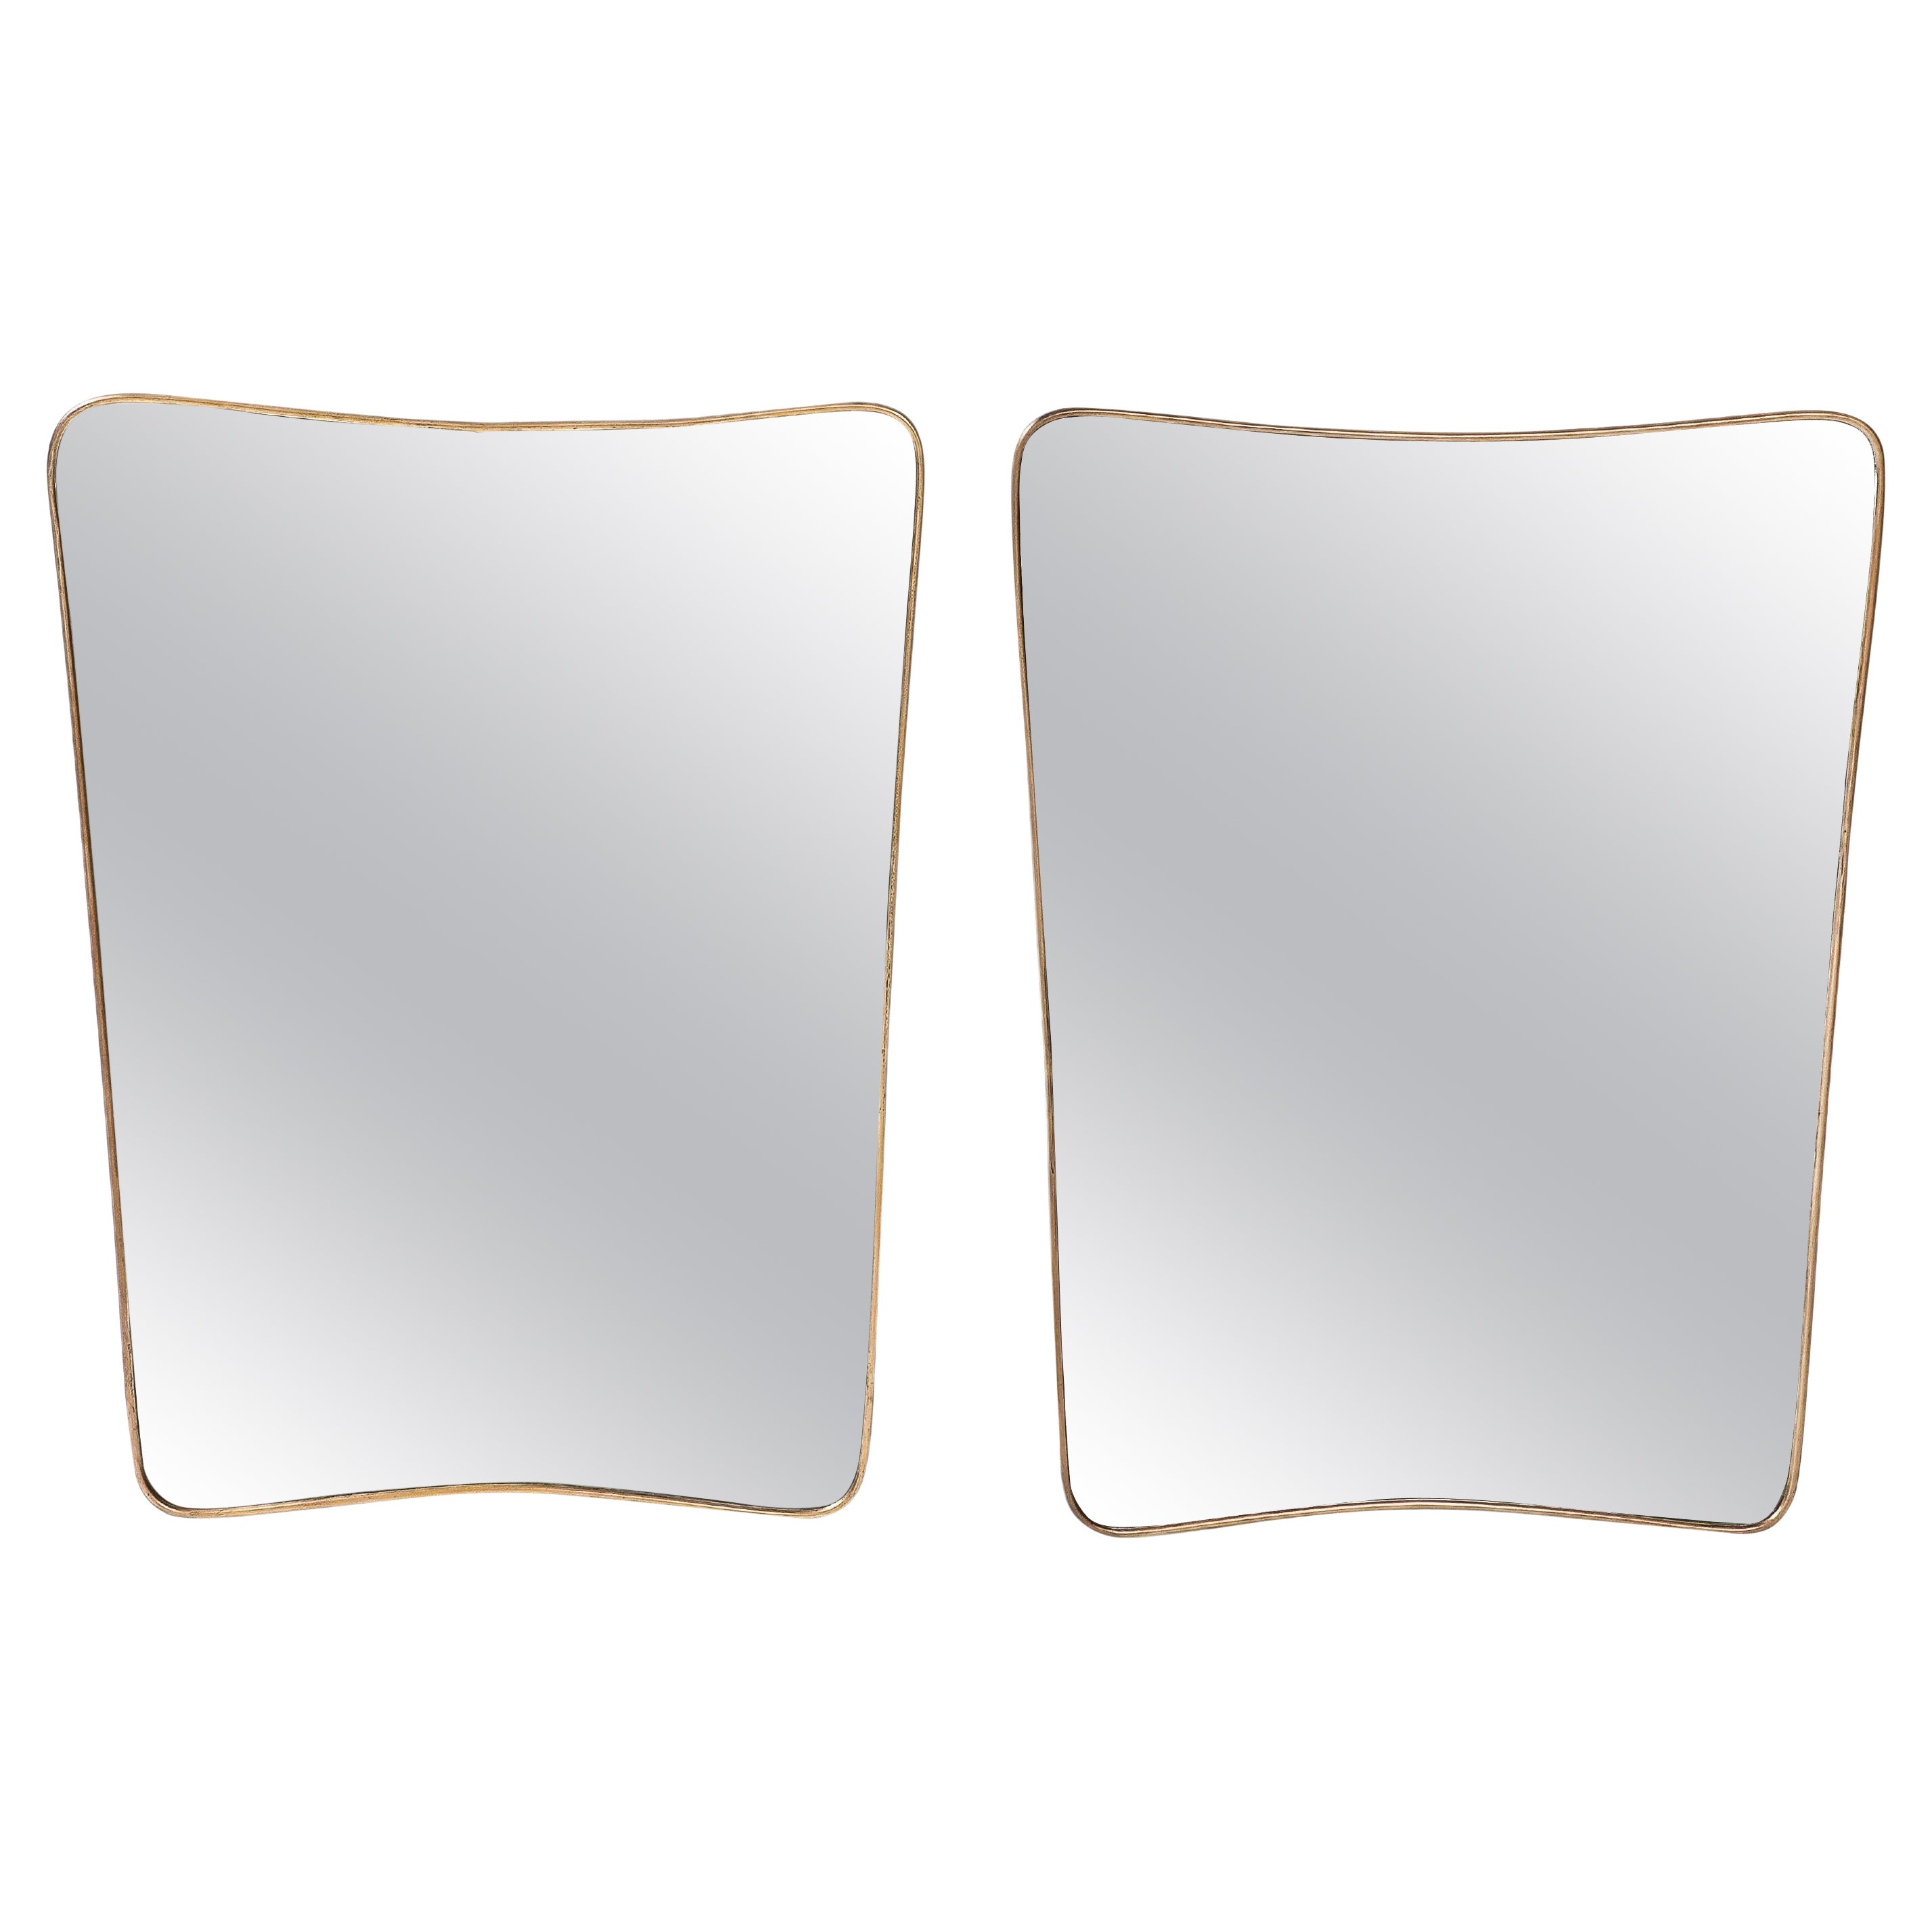 1950s Italian Modernist Pair of Shaped Brass Mirrors For Sale